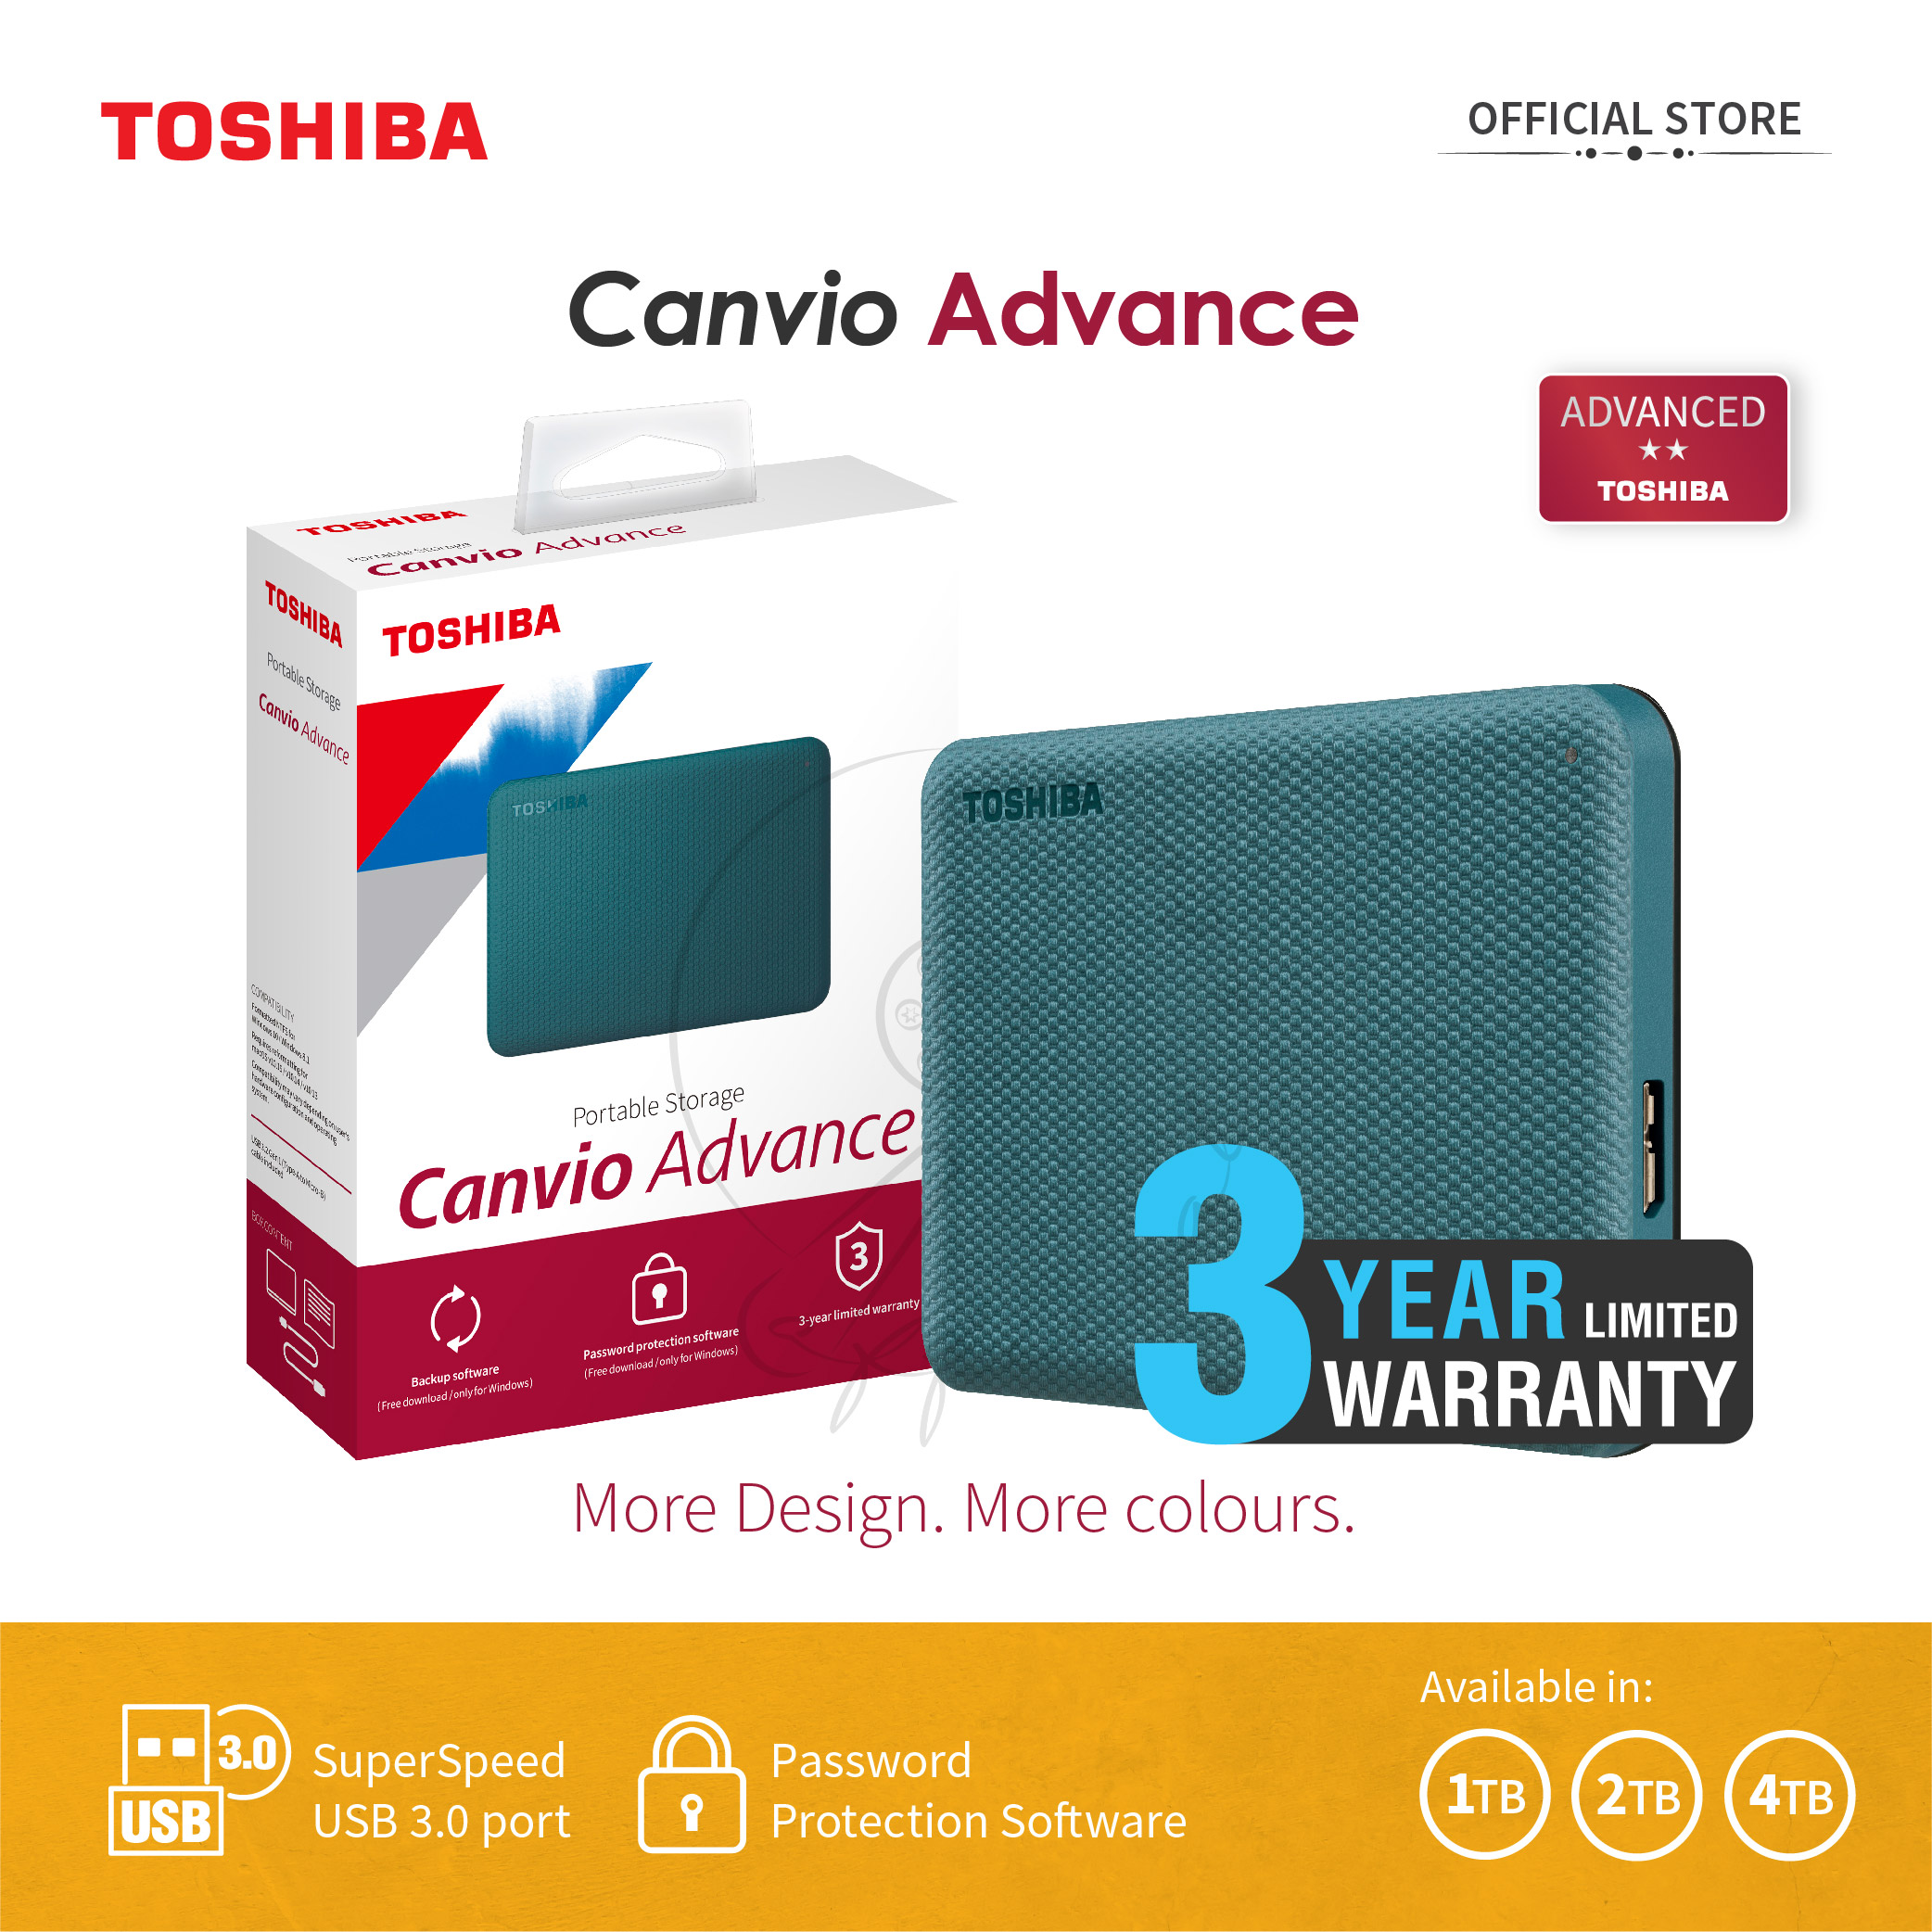 can a toshiba canvio for mac be reformatted for windows?